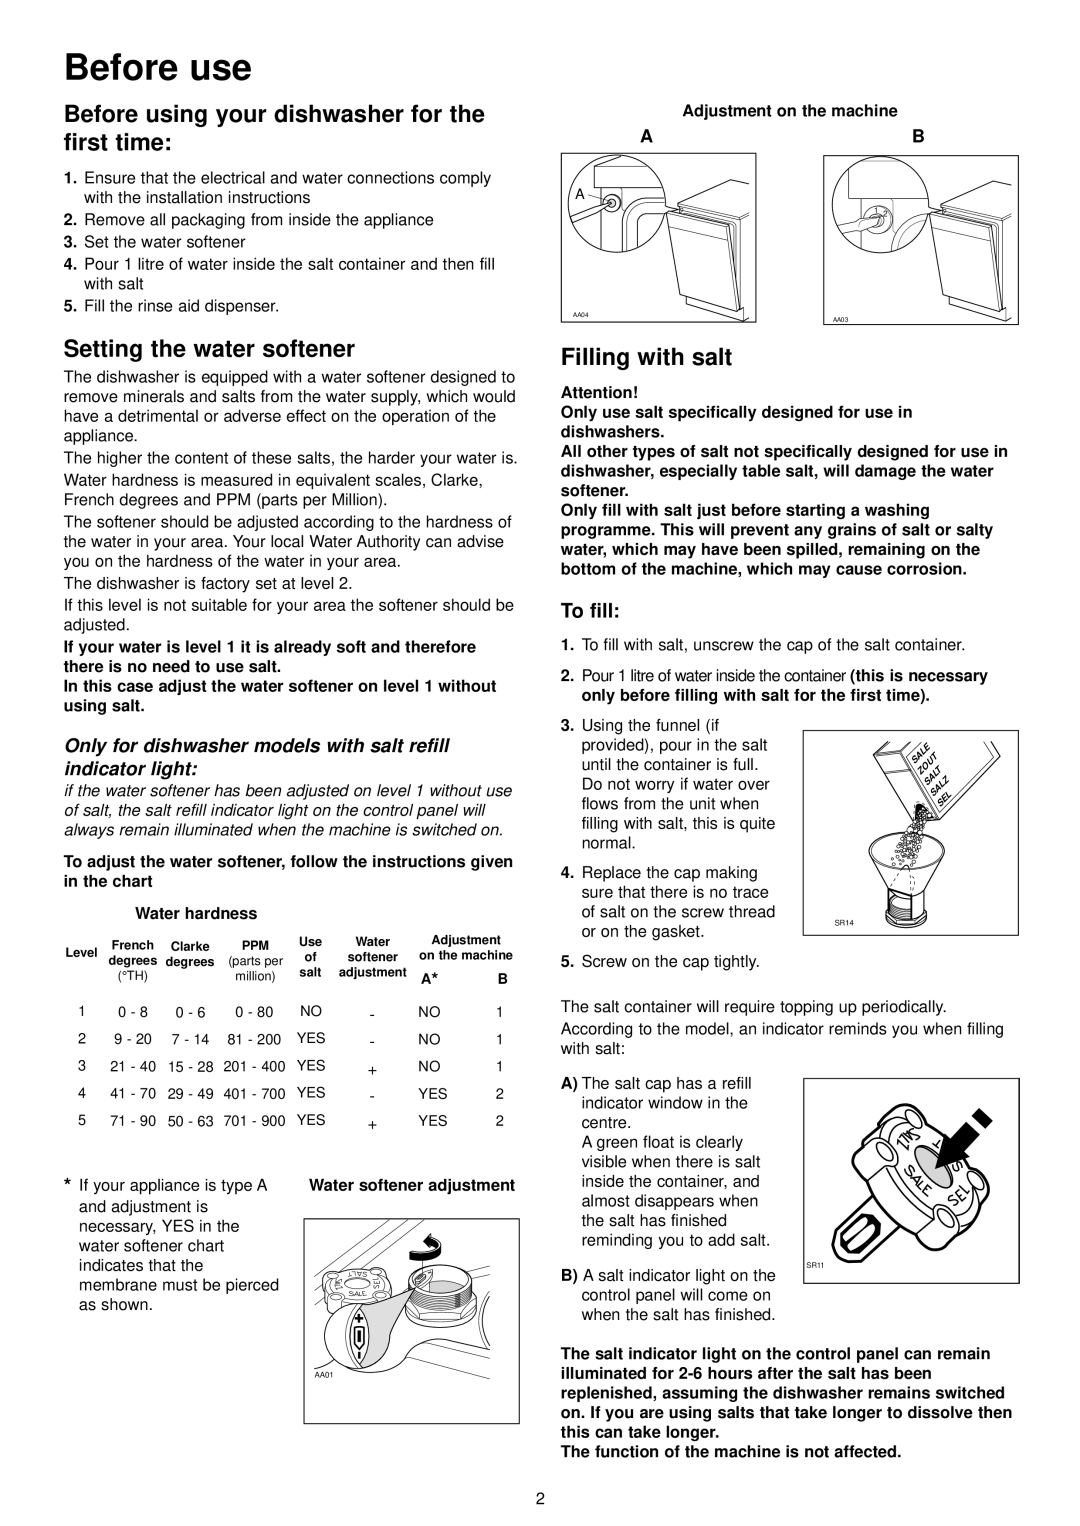 Zanussi DA 4142 manual Before use, Before using your dishwasher for the, first time, Setting the water softener, To fill 